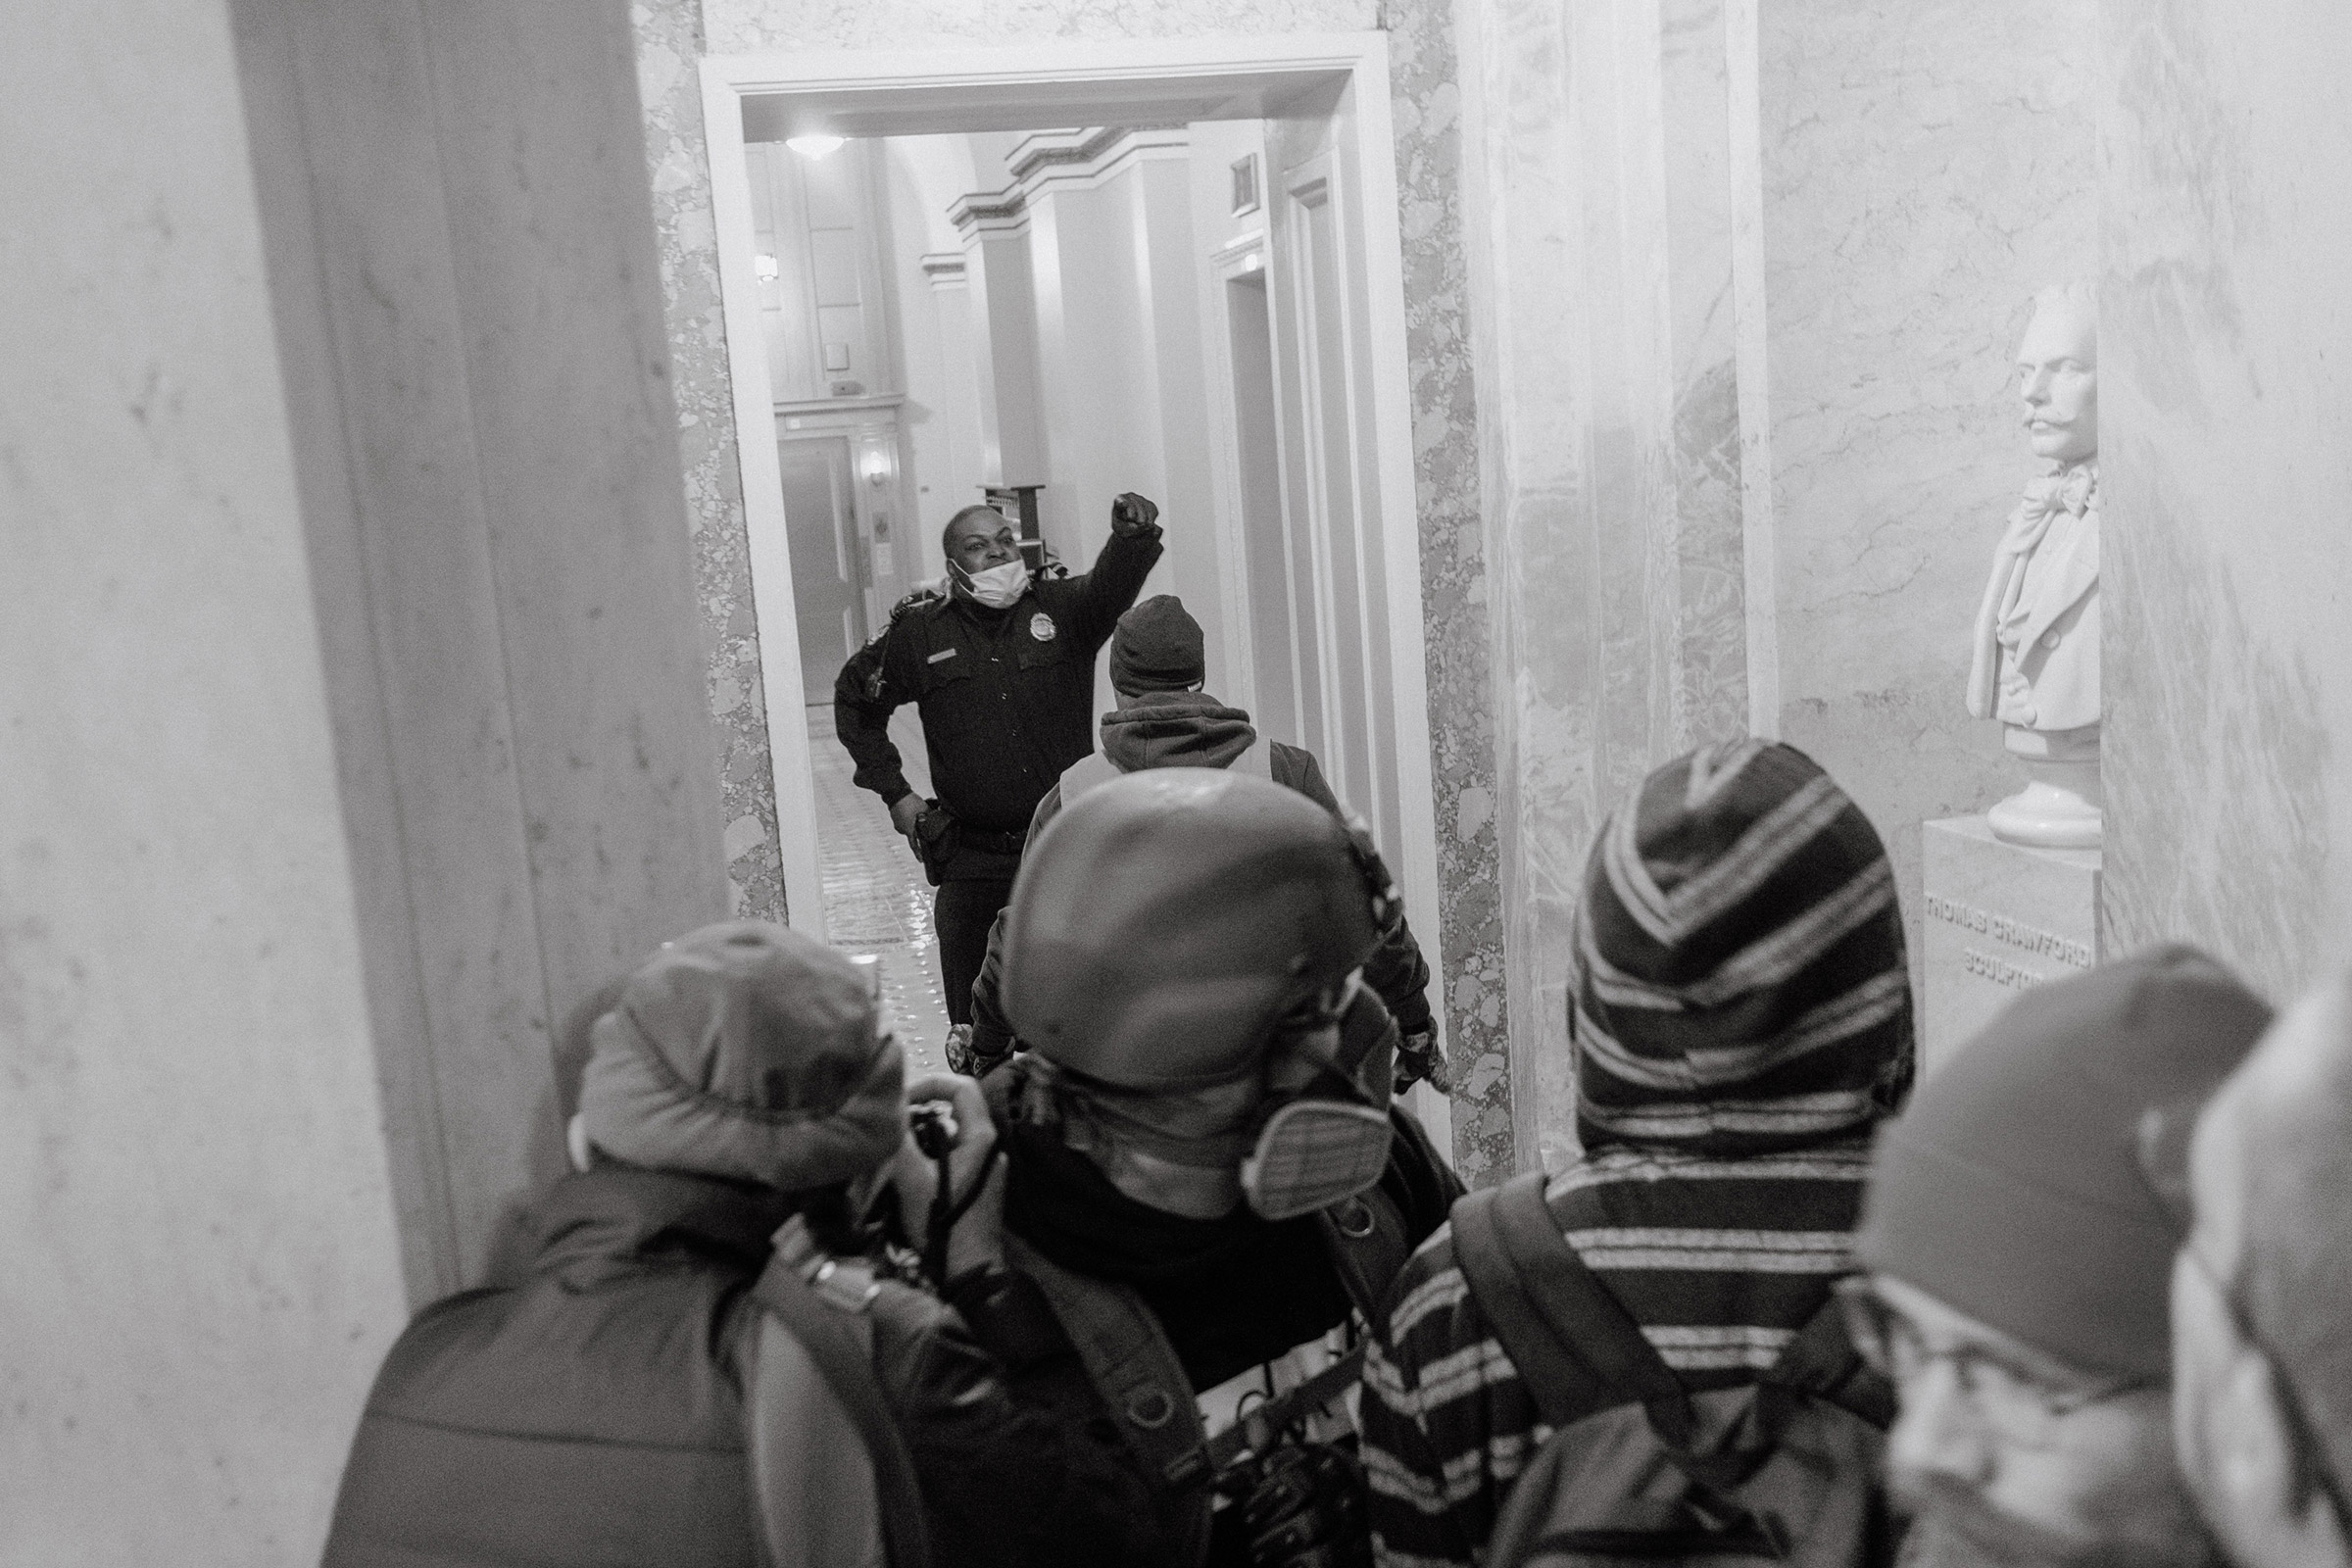 Capitol Police officer Eugene Goodman confronts protesters as they storm the <a href="https://time.com/5927198/capitol-trump-rioters-photography/">Capitol</a> in Washington on Jan. 6. (Christopher Lee for TIME)